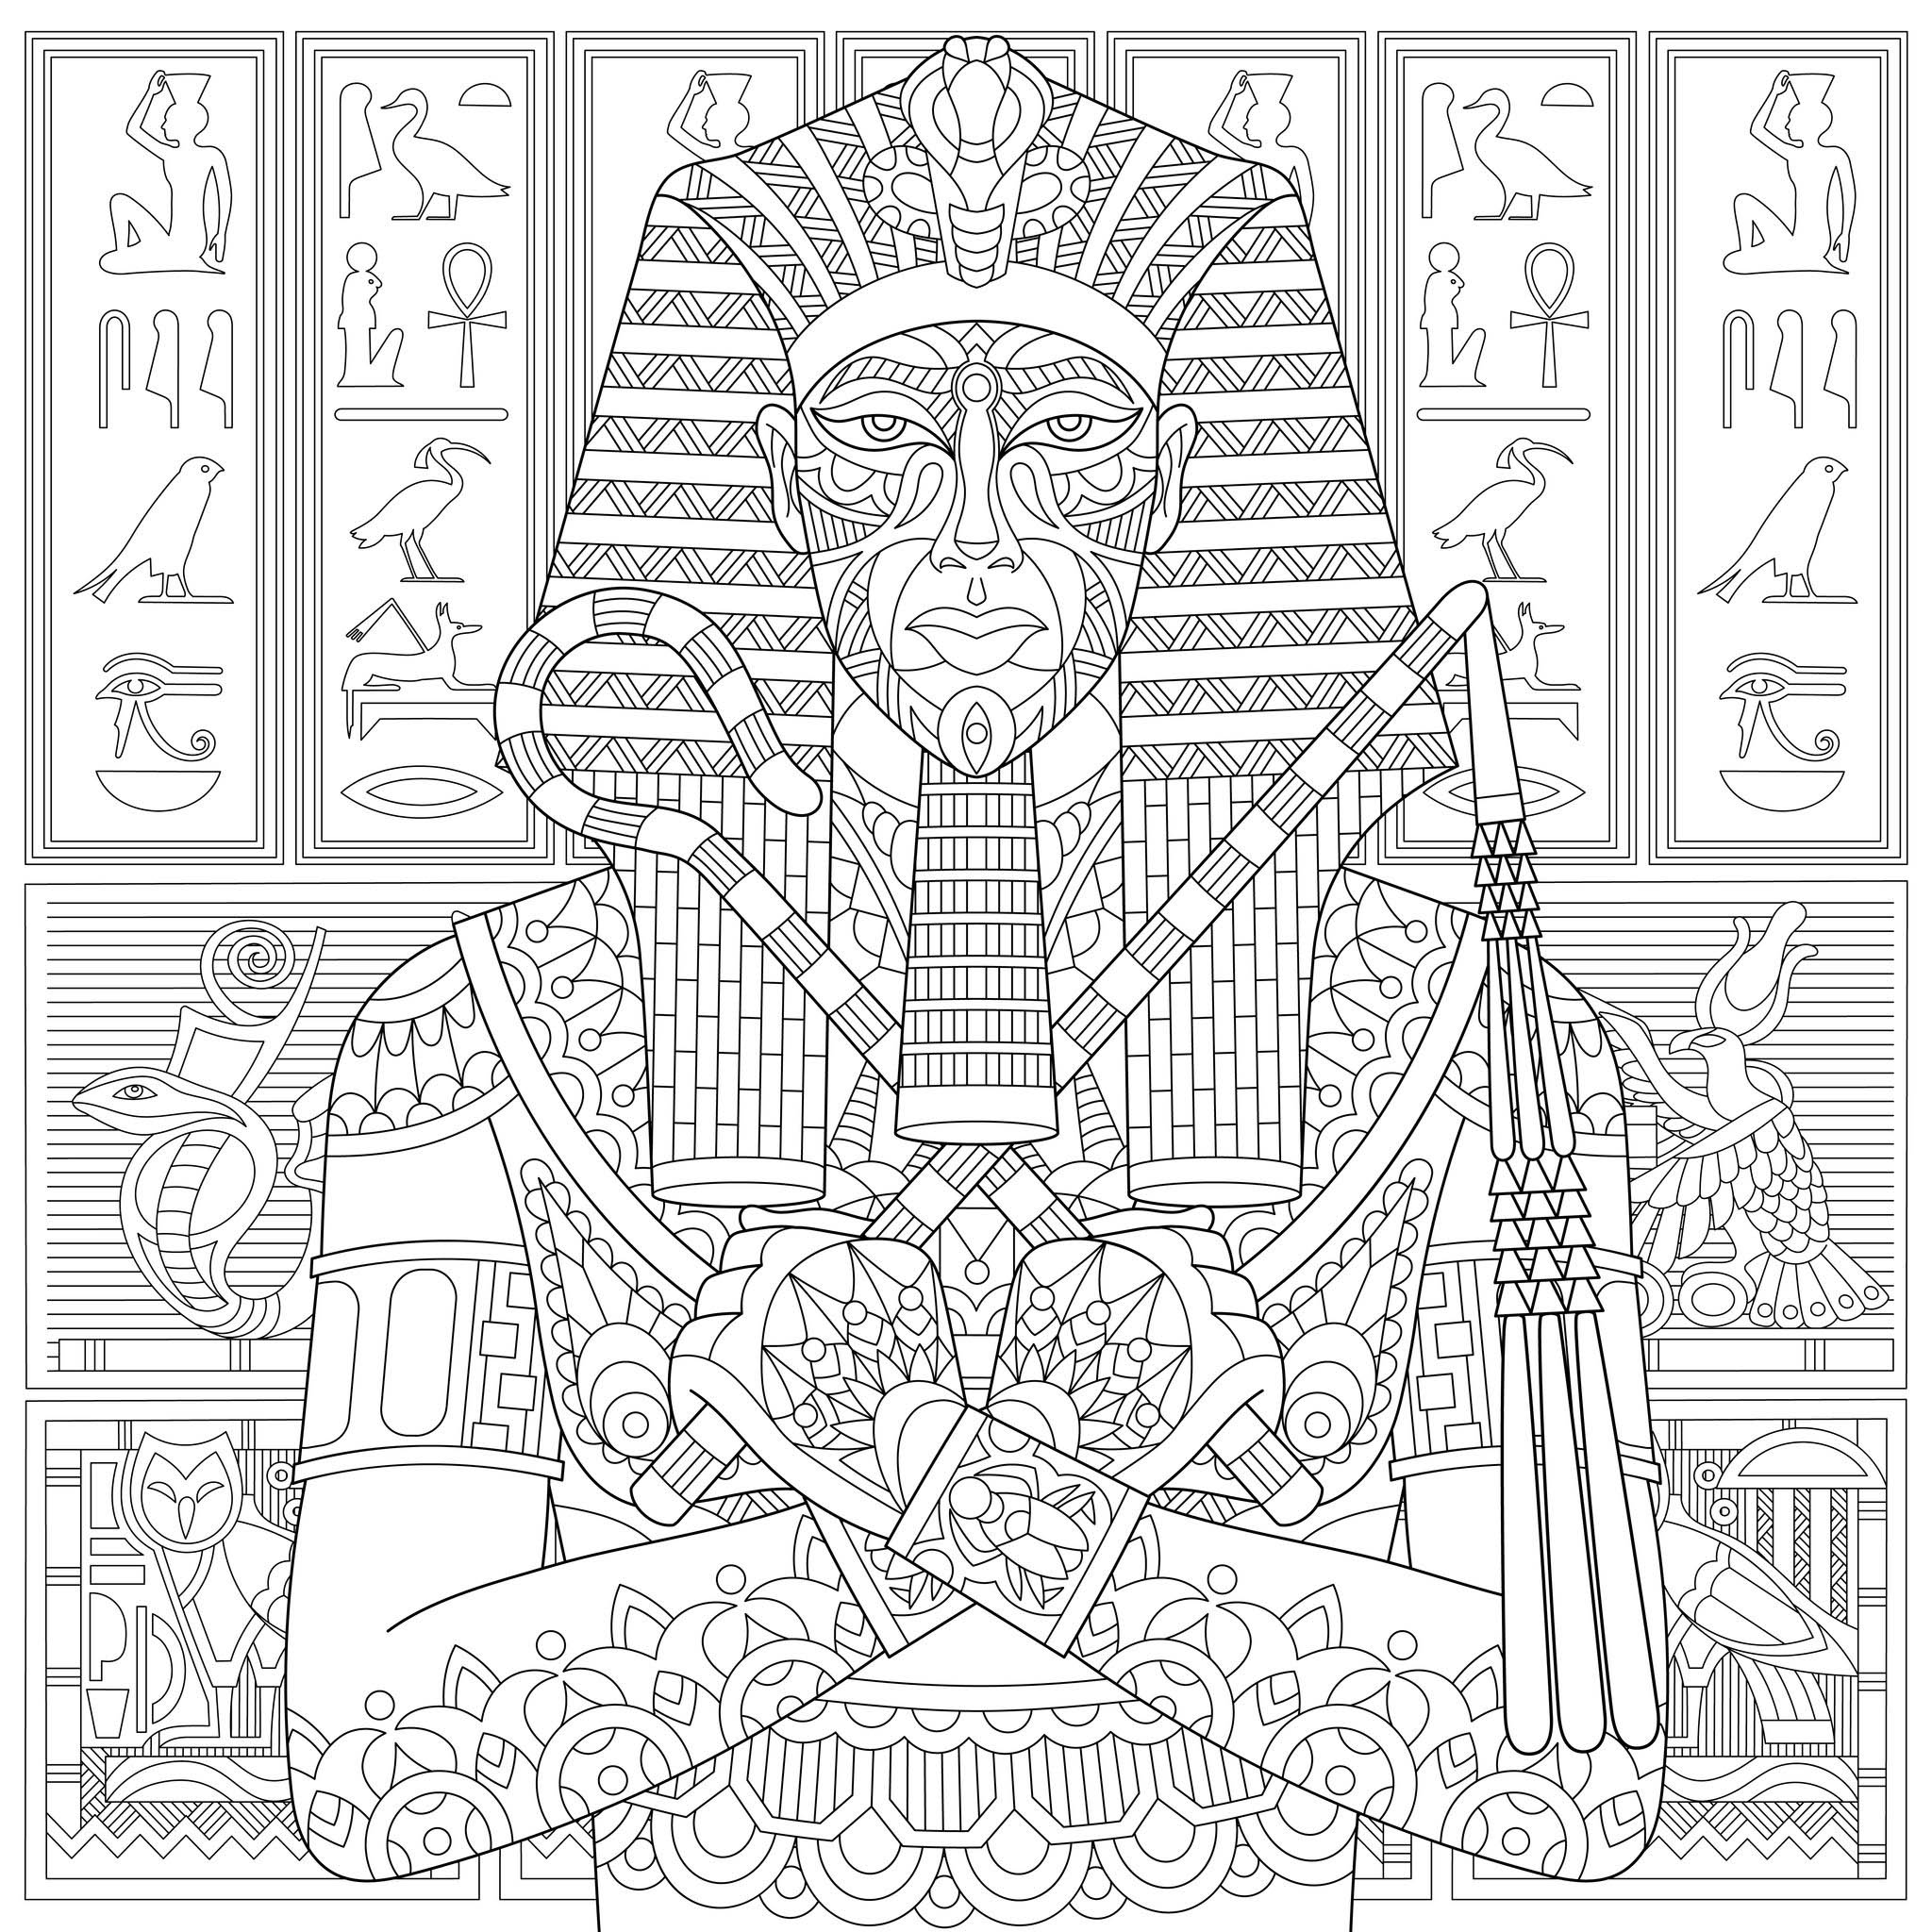 Pharaoh and hieroglyphs: a very complex coloring